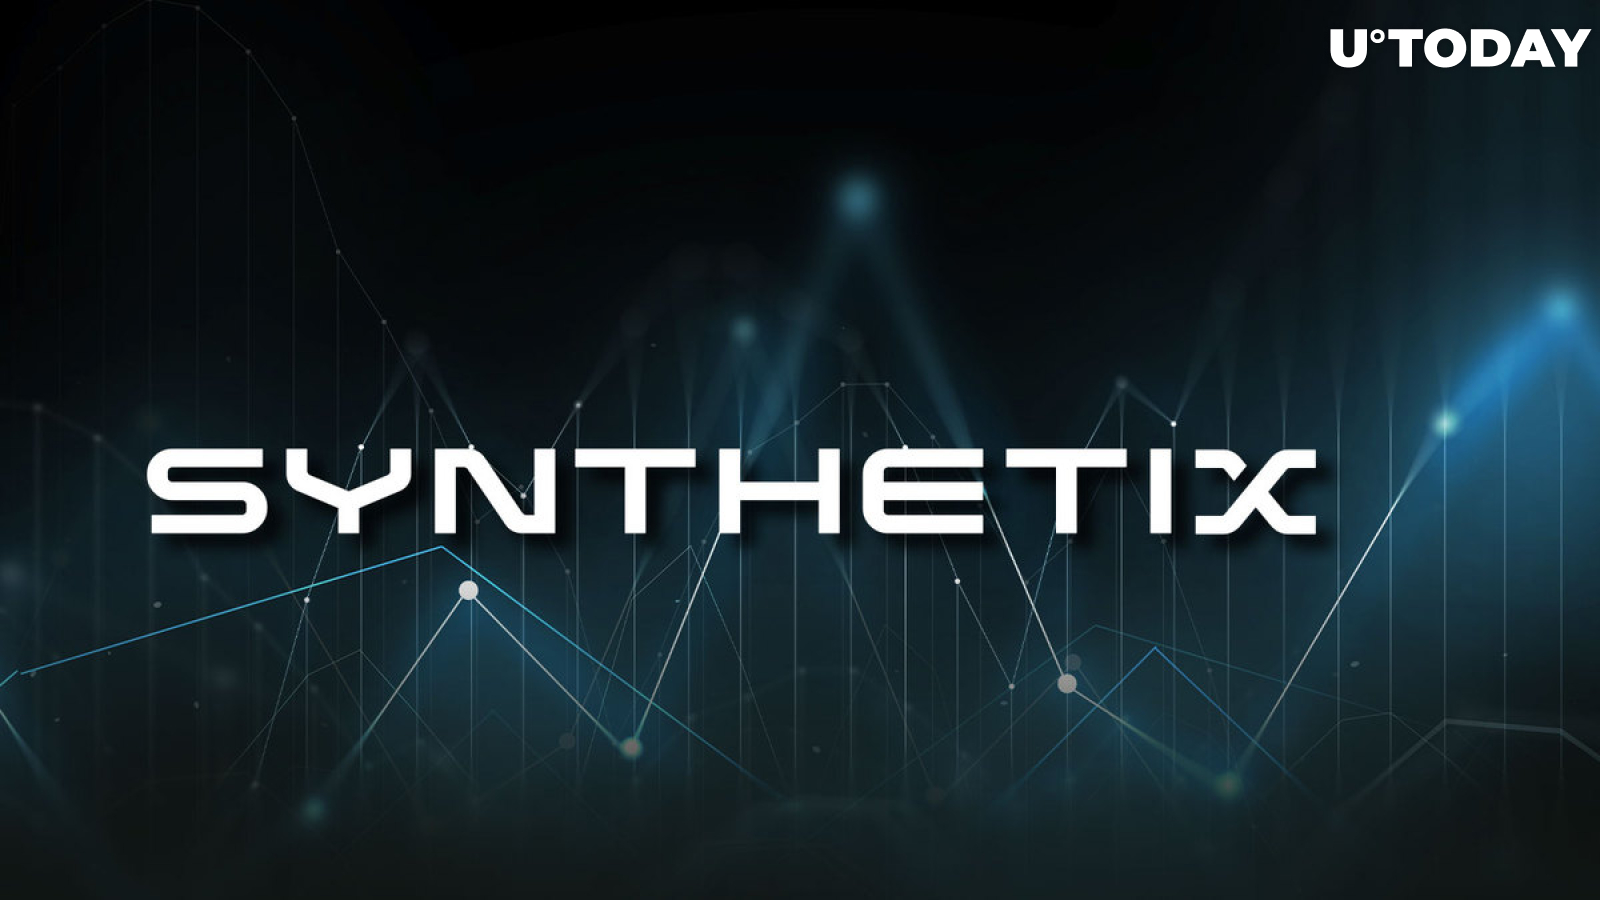 Synthetix (SNX) up 13% to Lead DeFi Push, What is Driving Growth?